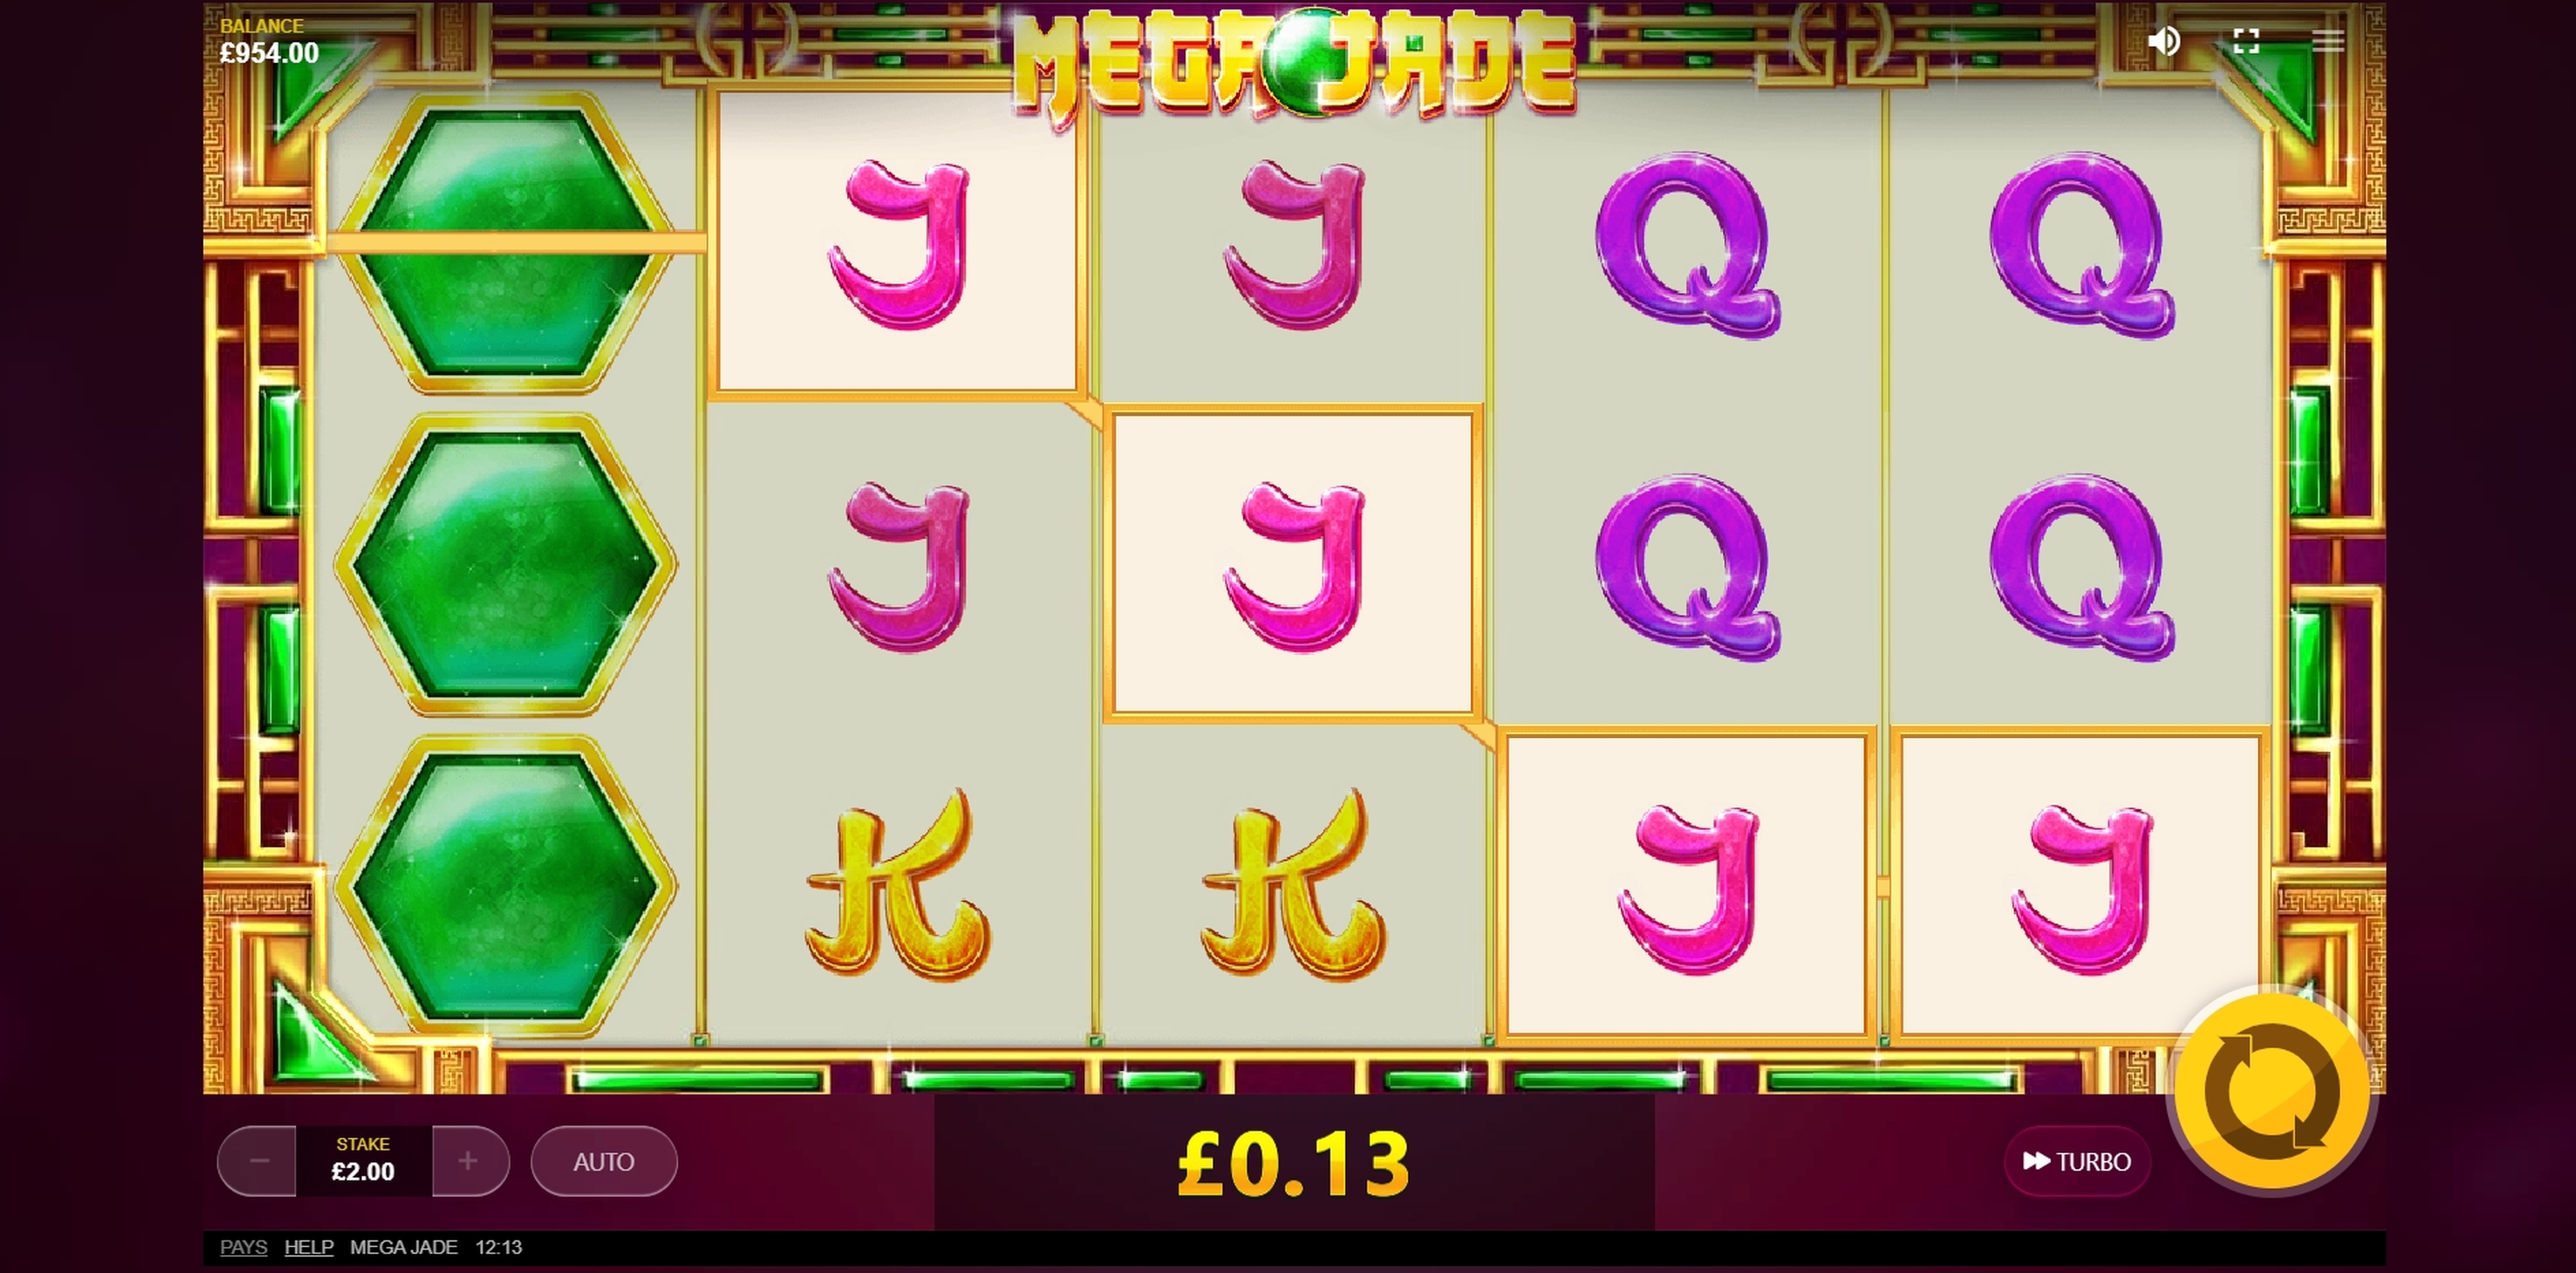 Win Money in Mega Jade Free Slot Game by Red Tiger Gaming